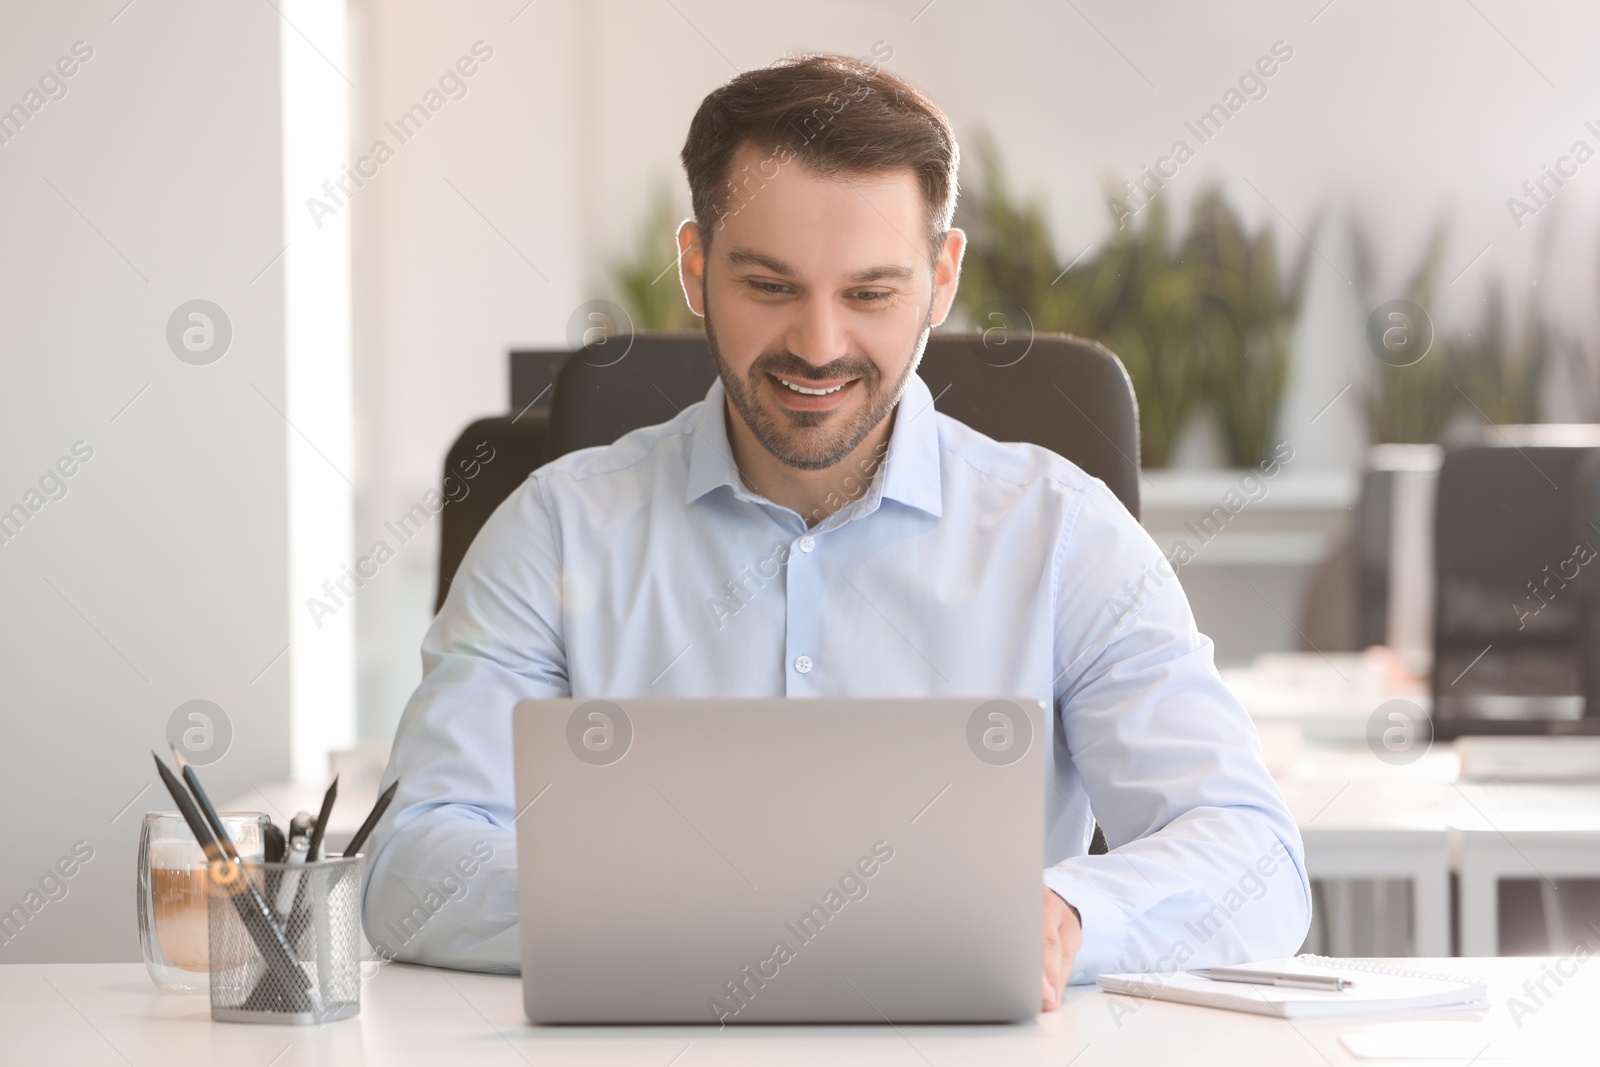 Photo of Happy man using modern laptop at white desk in office